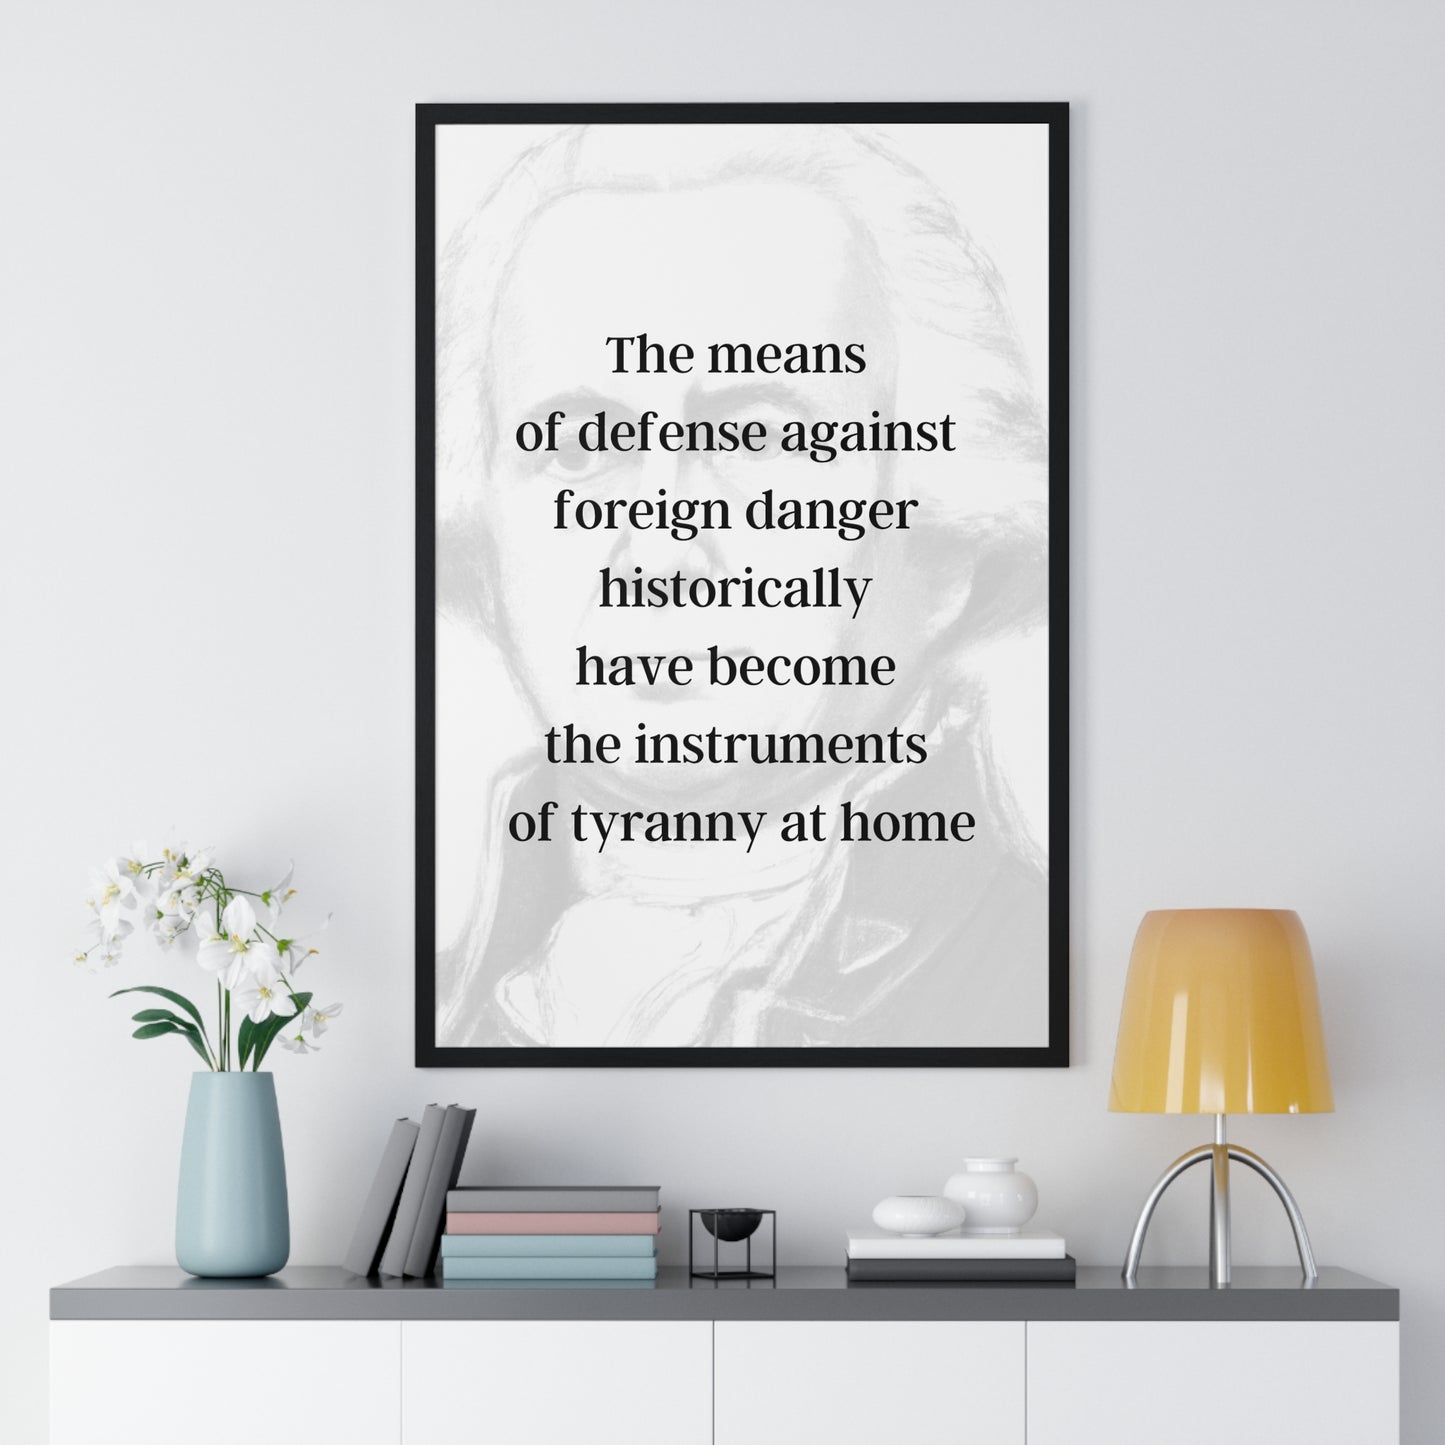 James Madison Quote 2, Poster Art, Light Print, 4th President of the United States, American Patriots, AI Art, Political Art, Poster Prints, Presidential Portraits, Presidential Quotes, Inspirational Quotes